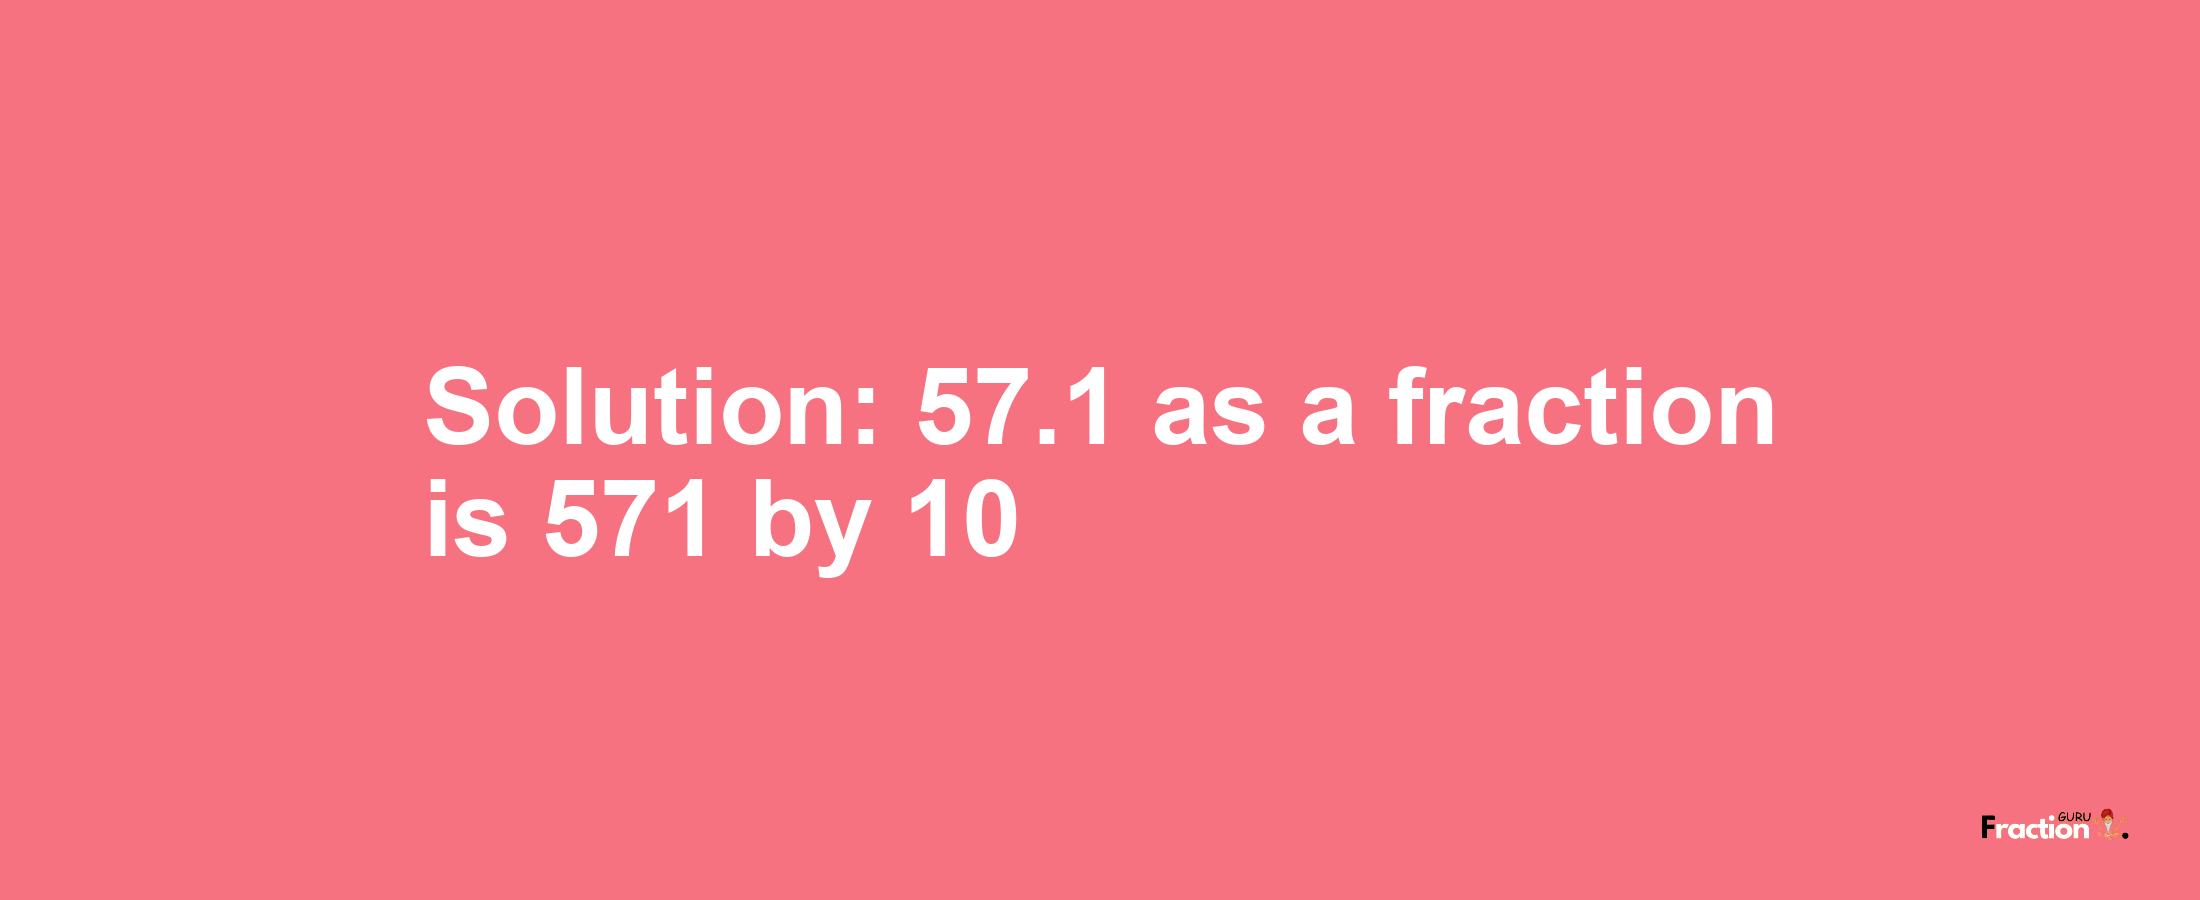 Solution:57.1 as a fraction is 571/10